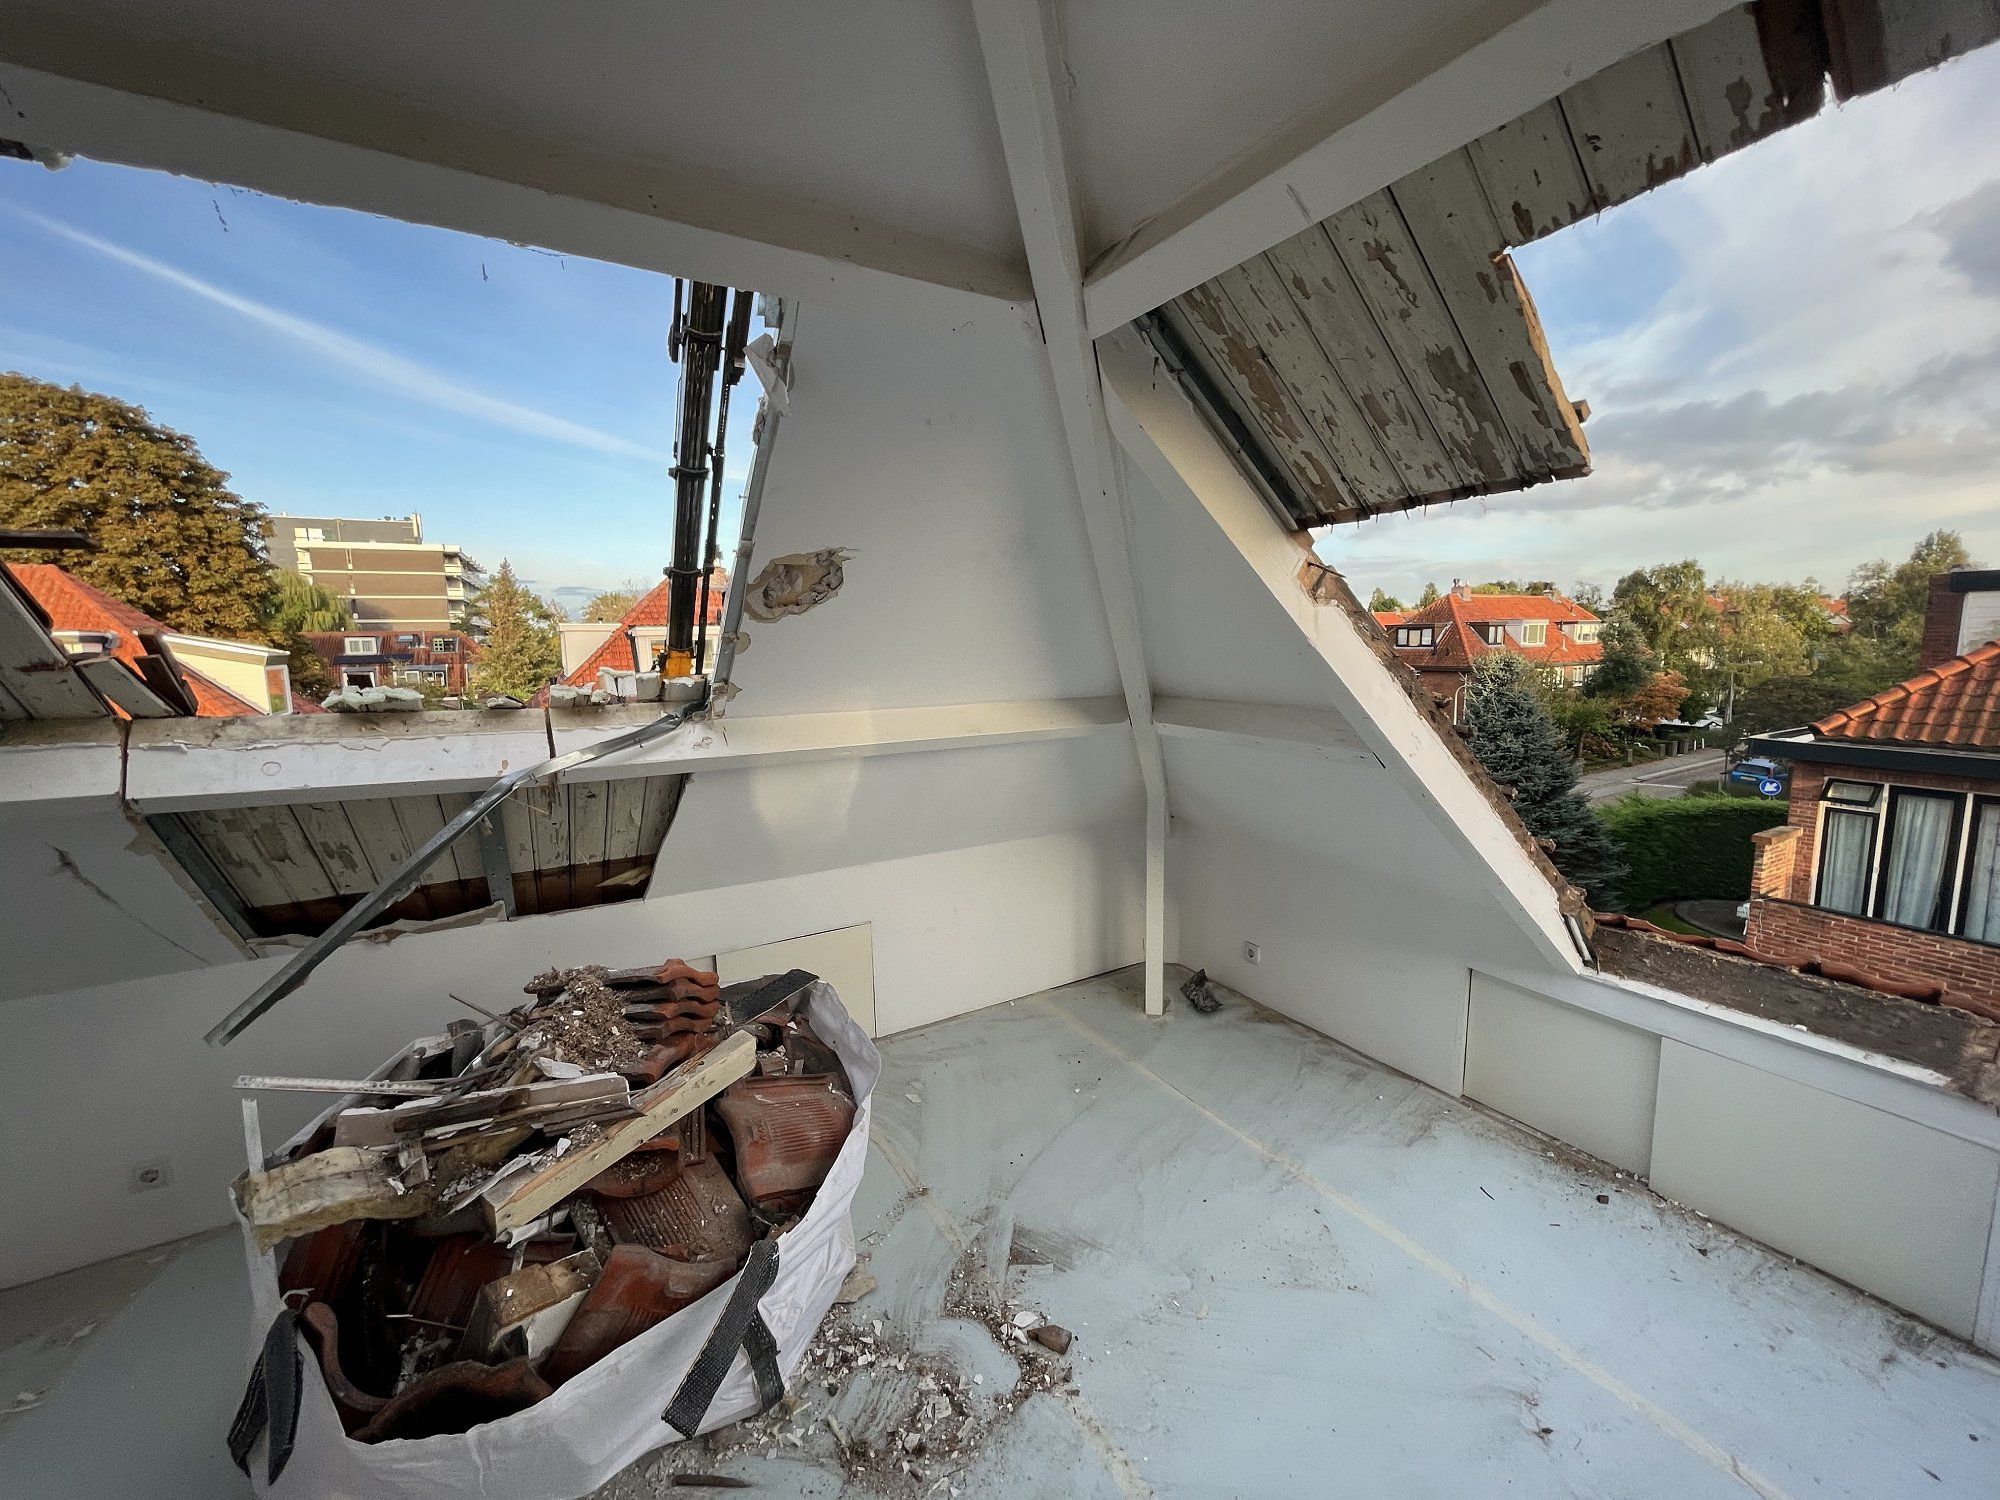 During the attic renovation in the Netherlands